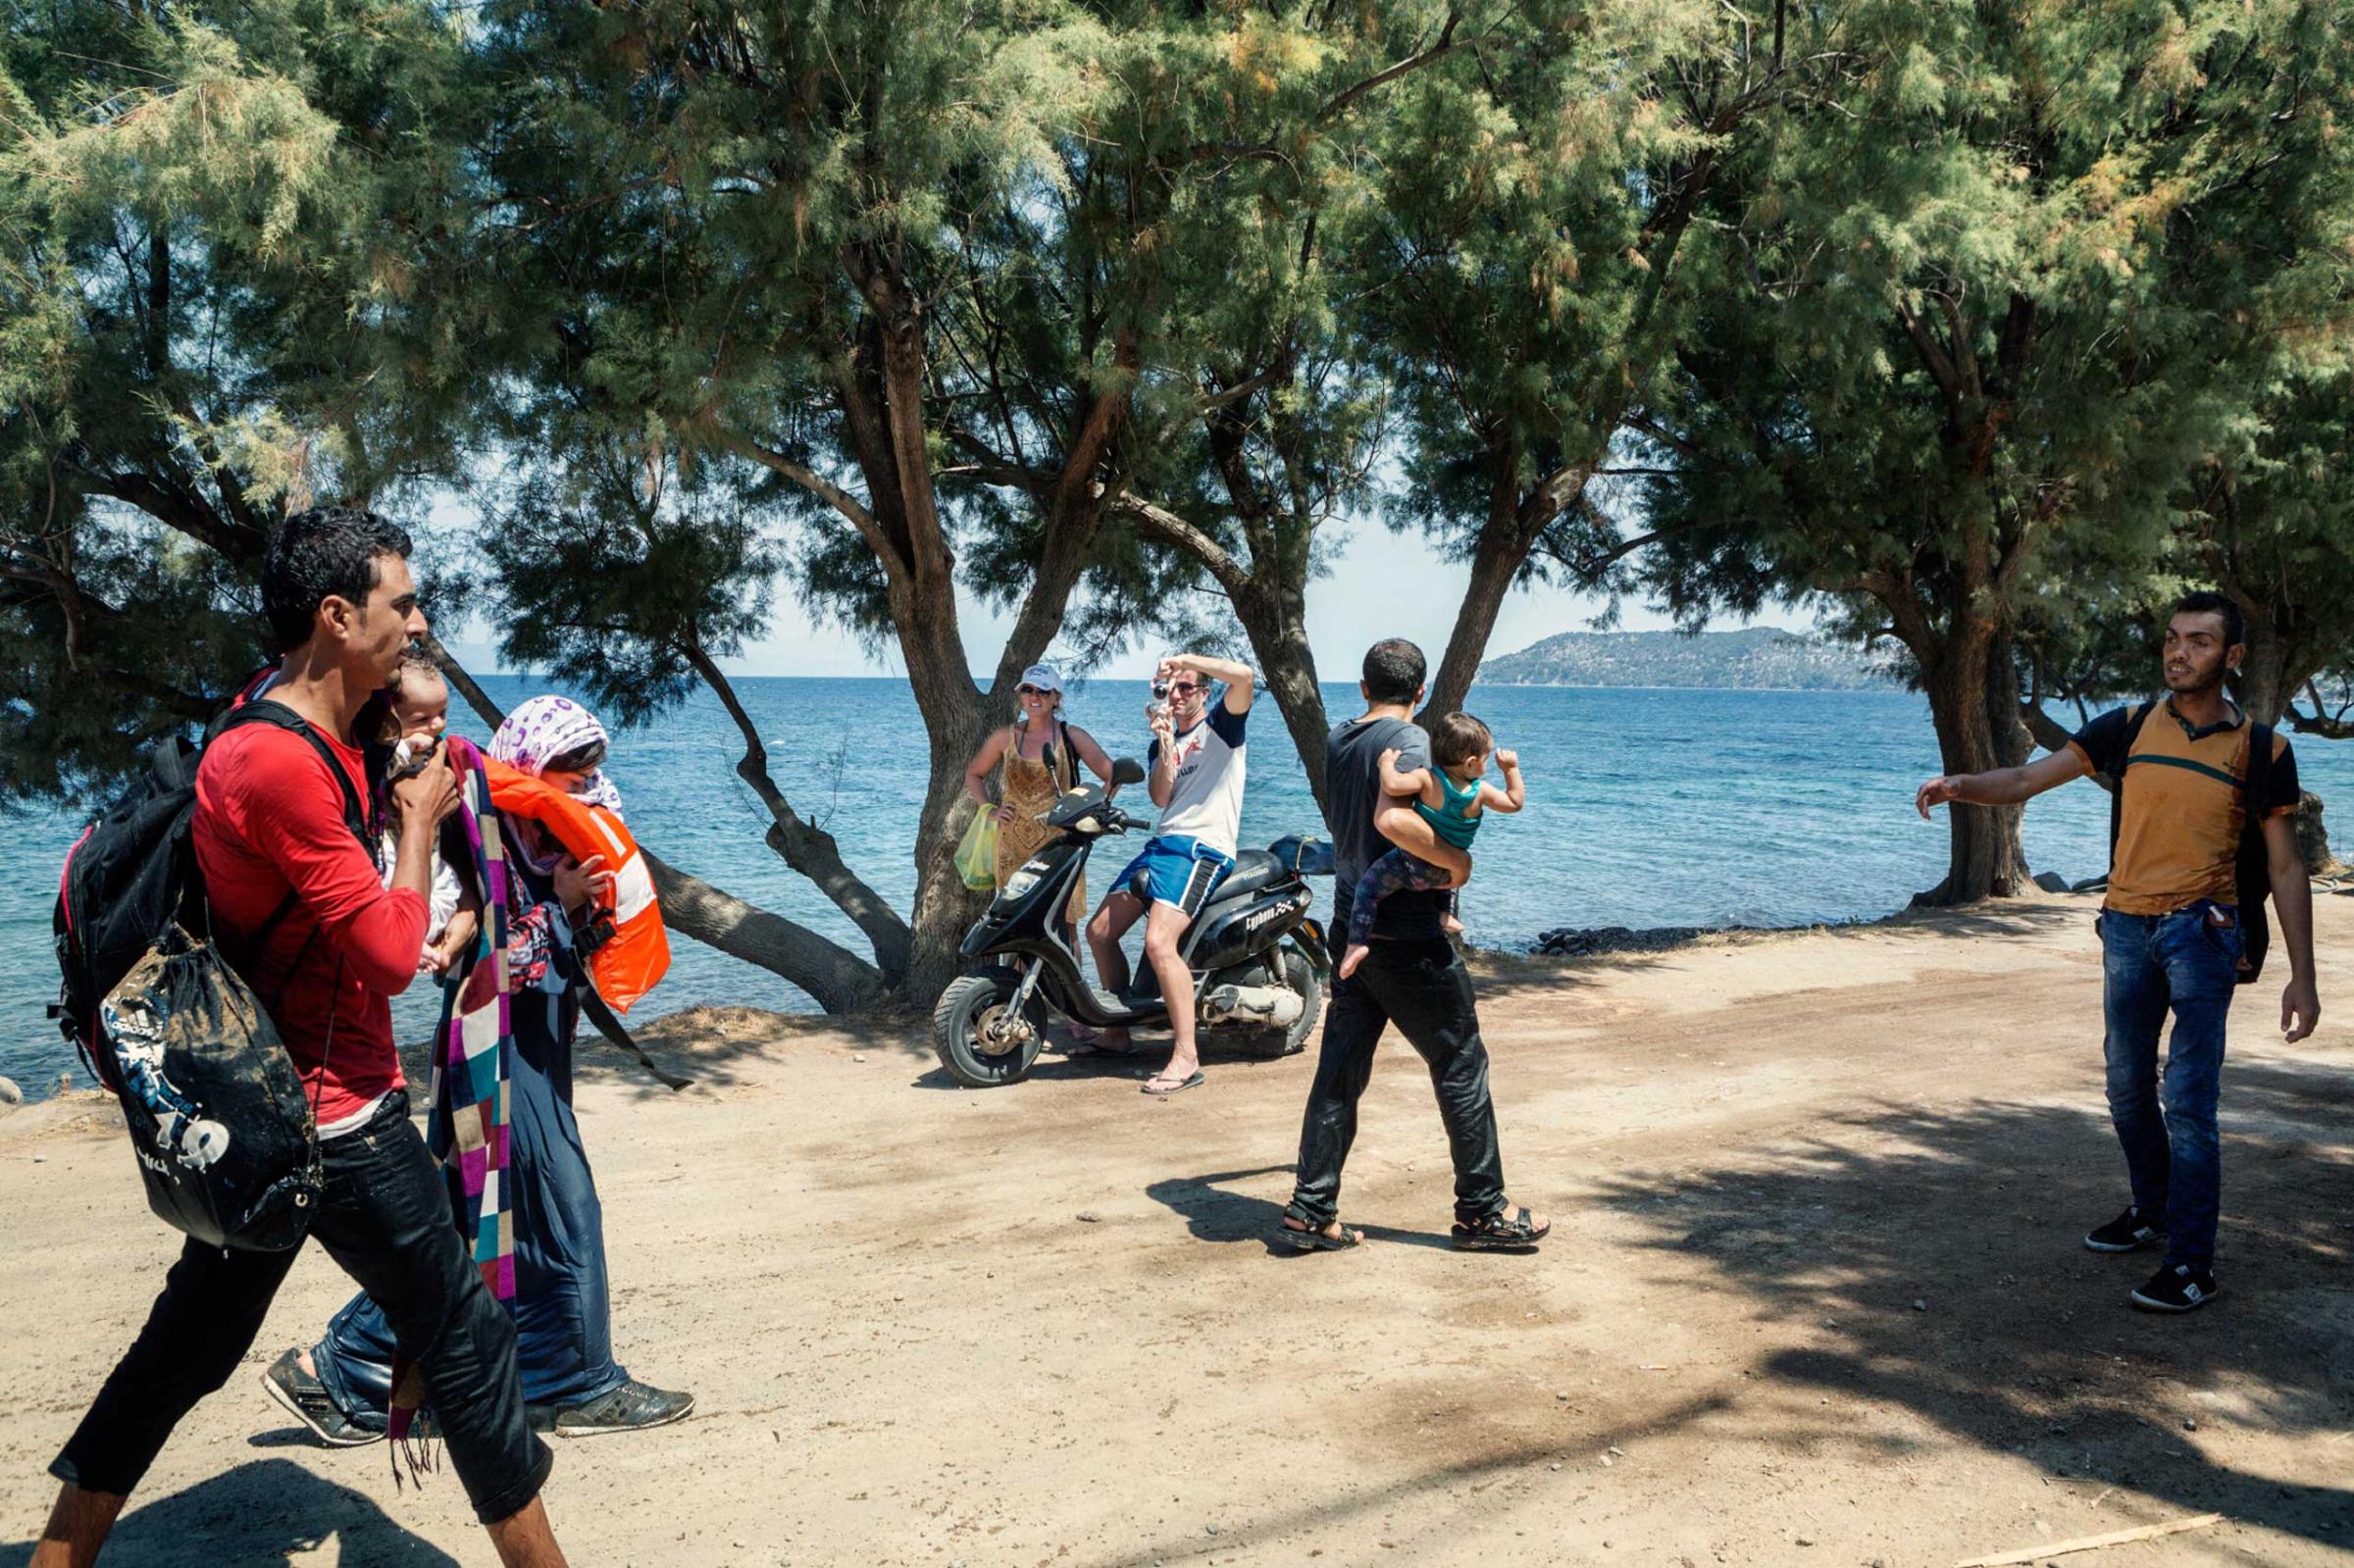 Two tourists photographed a Syrian family who arrived at Eftalou, on the northern coast of the Greek island of Lesbos, Greece, Aug. 12, 2015.